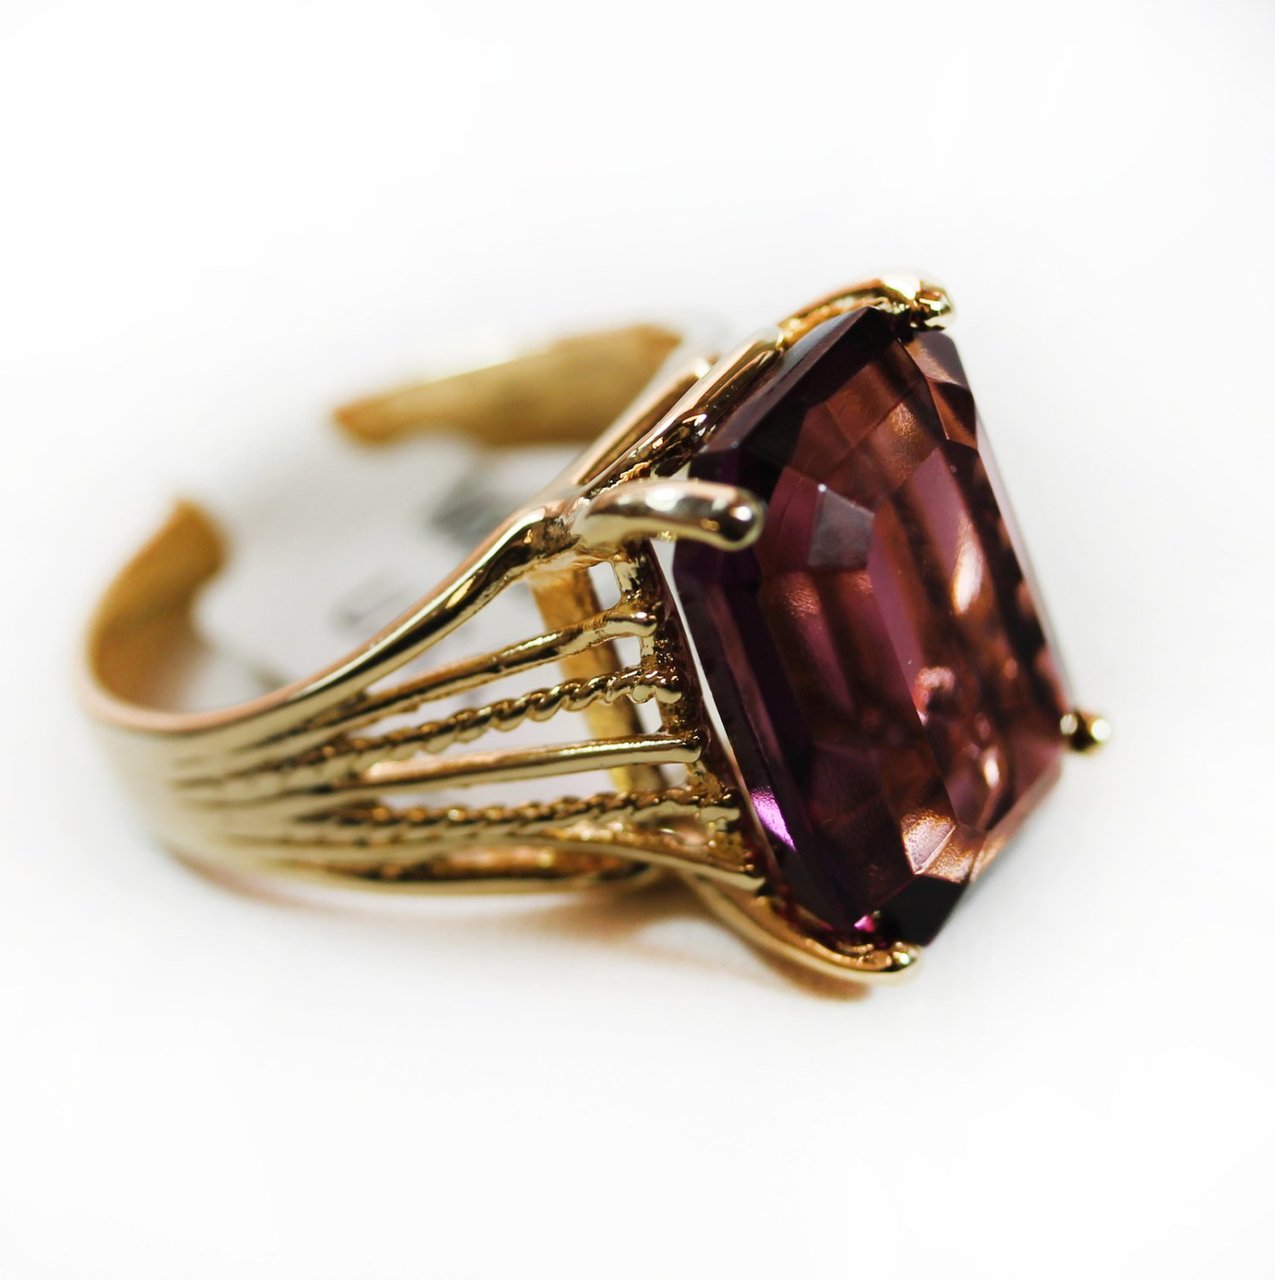 Vintage 1970s 18k Gold Electroplated Cocktail Ring Amethyst Austrian Crystal Made in USA by PVD Vintage Jewelry